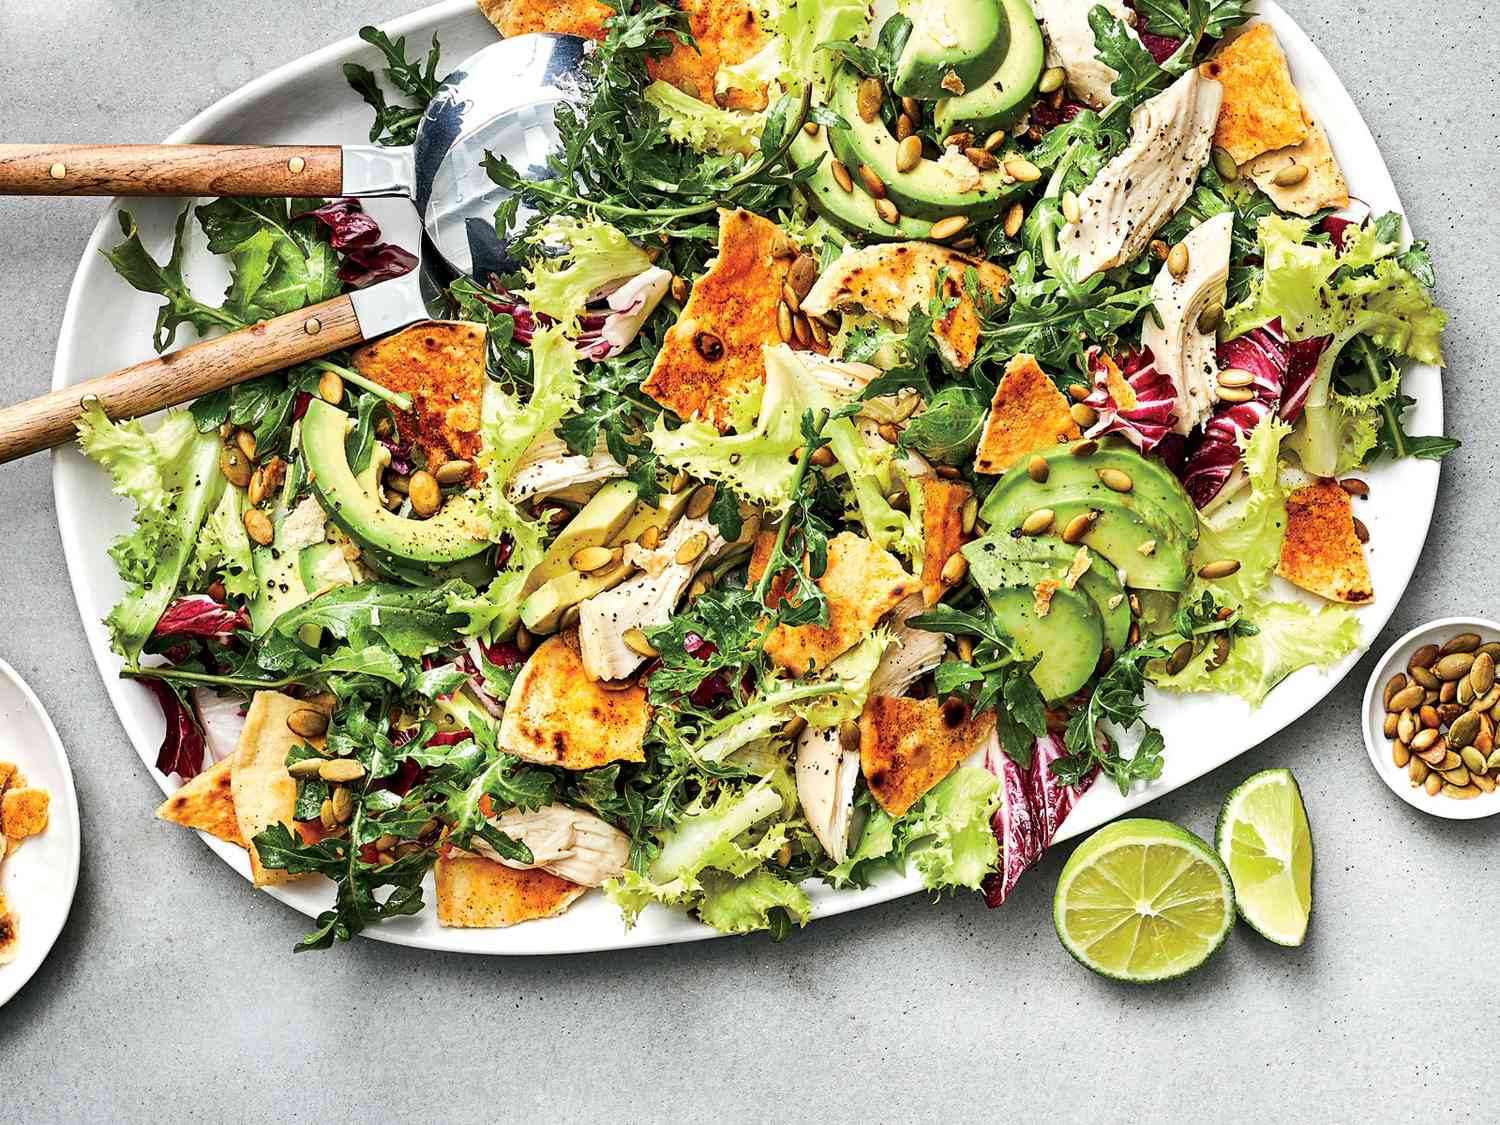 Peppery Greens Salad with Avocado, Chicken, and Tortilla Croutons Recipe